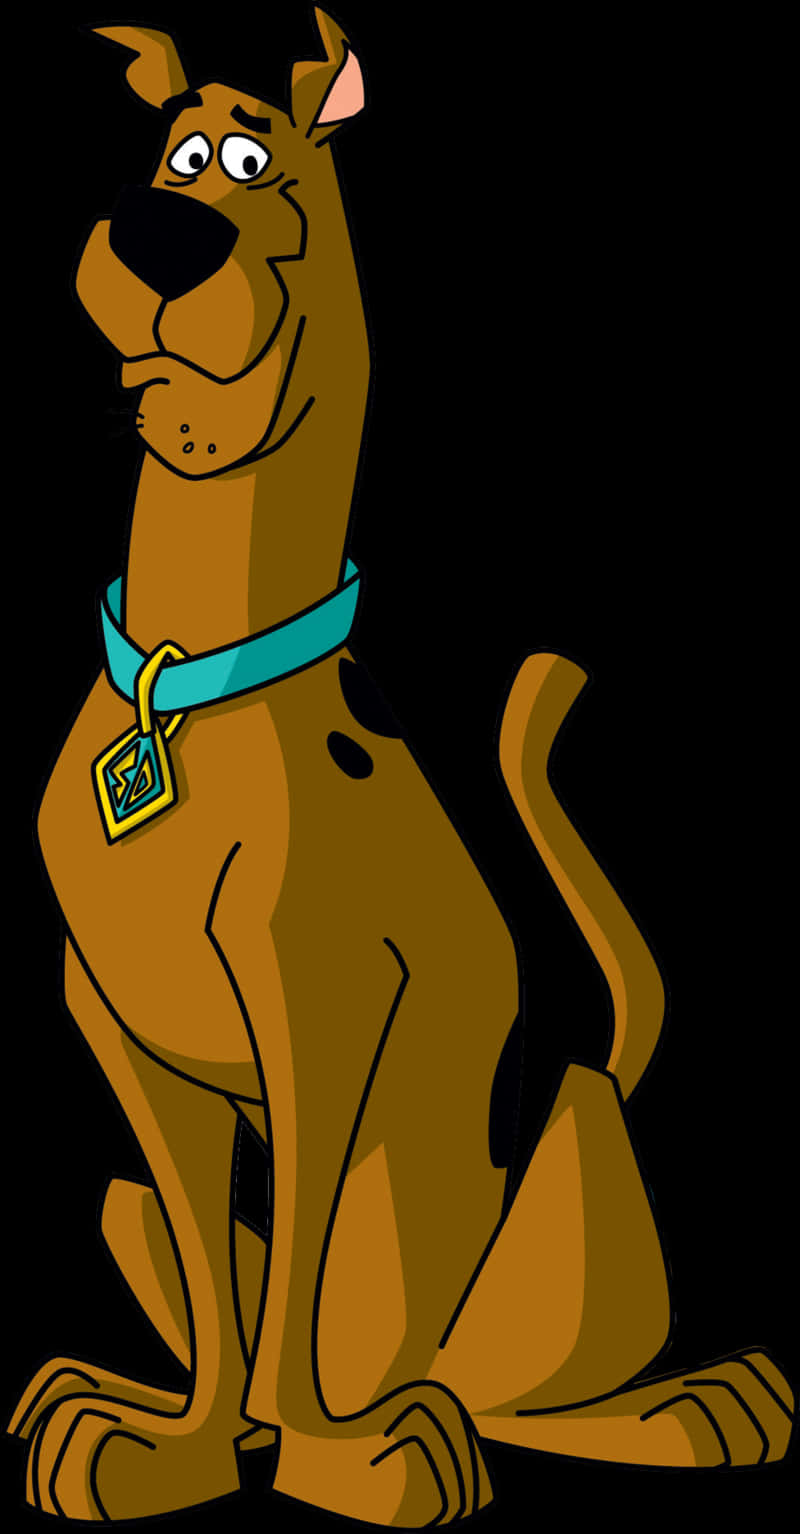 Scooby Doo Animated Character